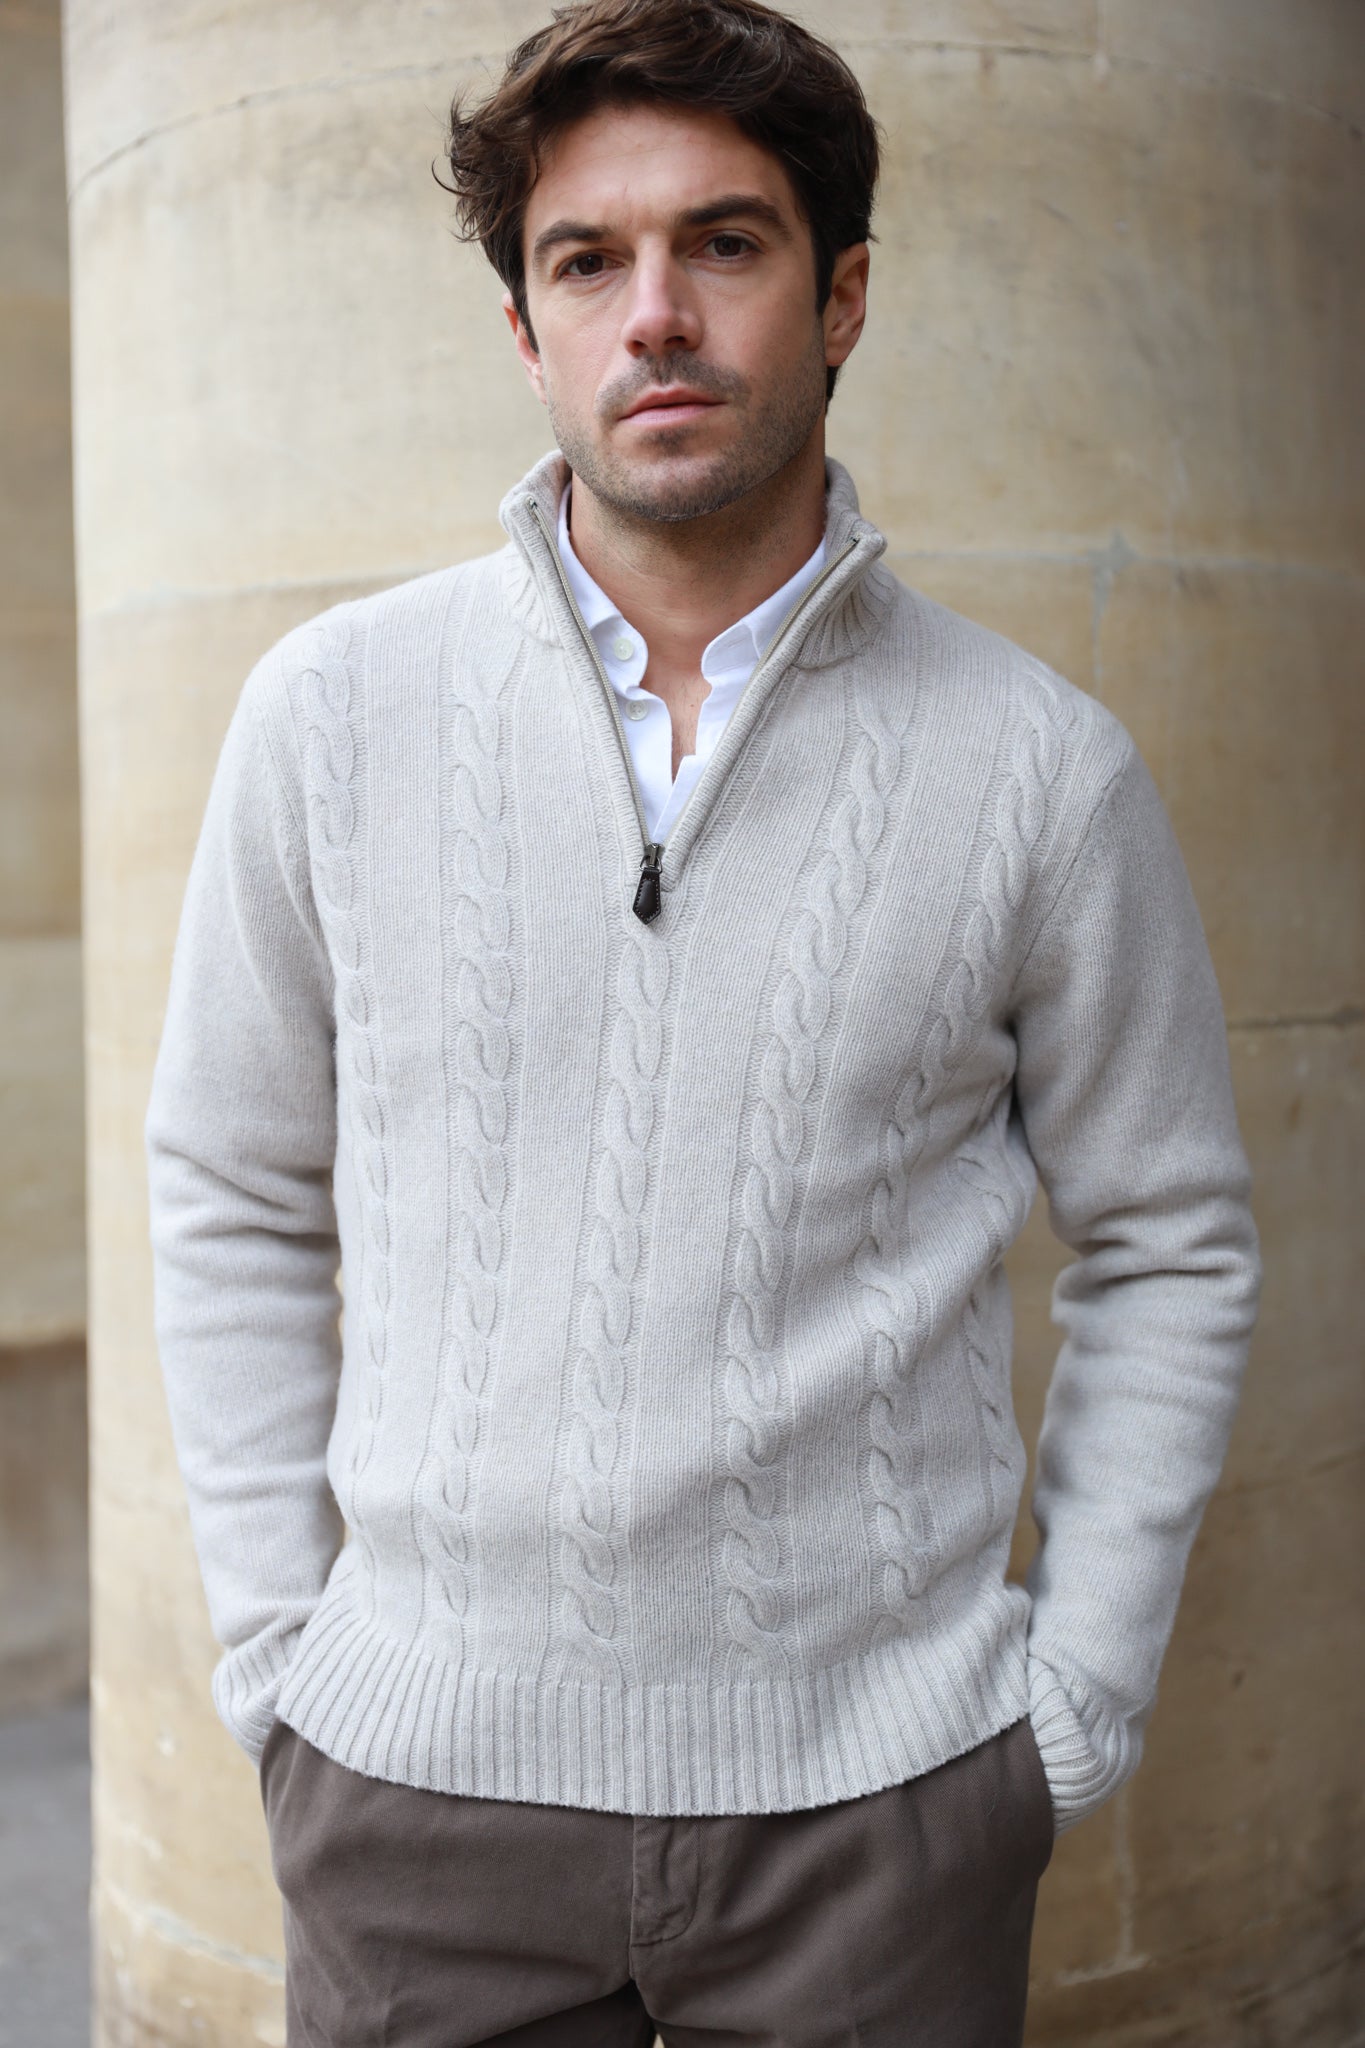 Pull chaud pour hiver Beige homme